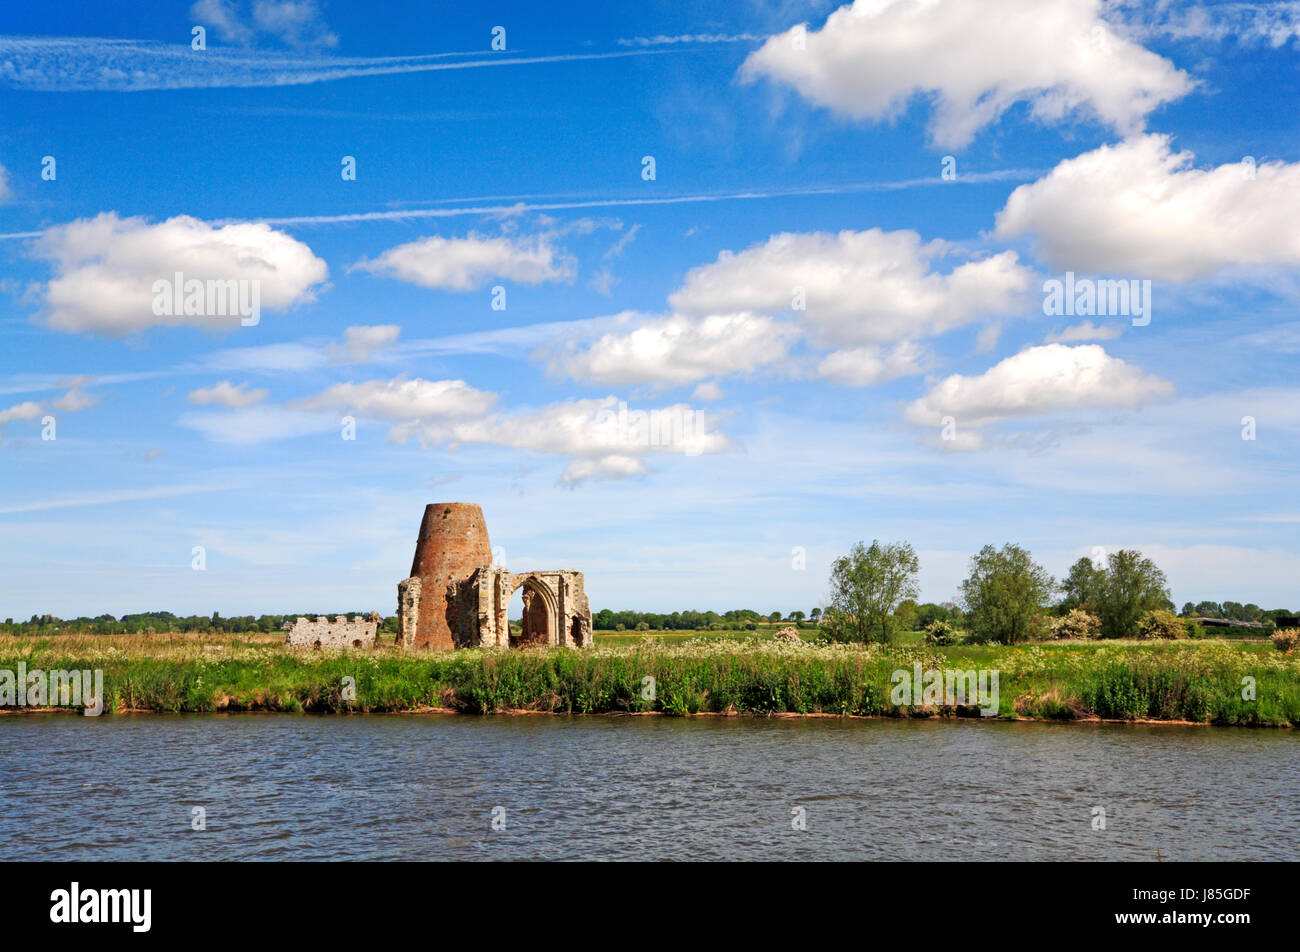 A landscape by the River Bure featuring the disused St Benet's Abbey Drainage Mill and the ruins of the St Benet's Abbey gatehouse. Stock Photo